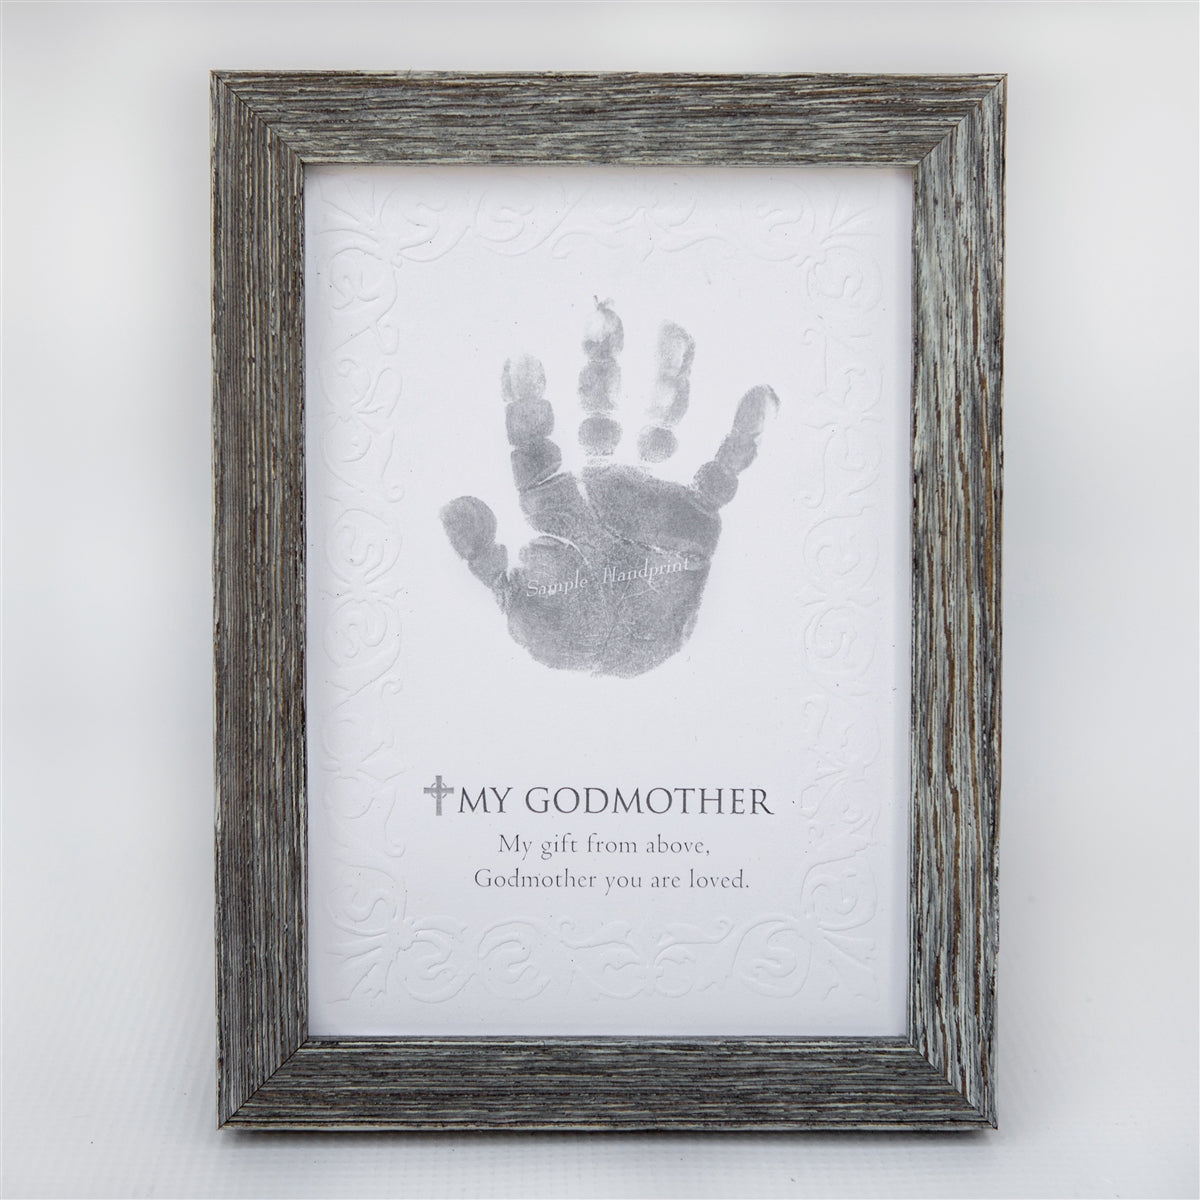 5x7 farmhouse frame with &quot;My Godmother&quot; sentiment on embossed cardstock with space for a child&#39;s handprint.